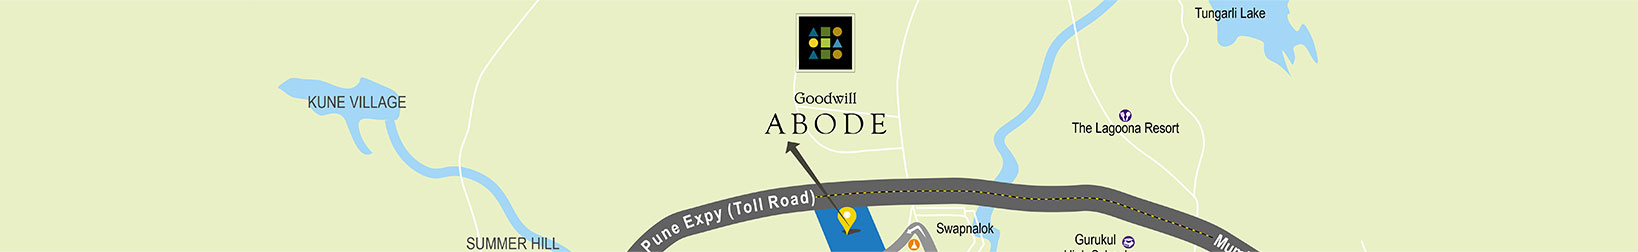 Abode Location Map